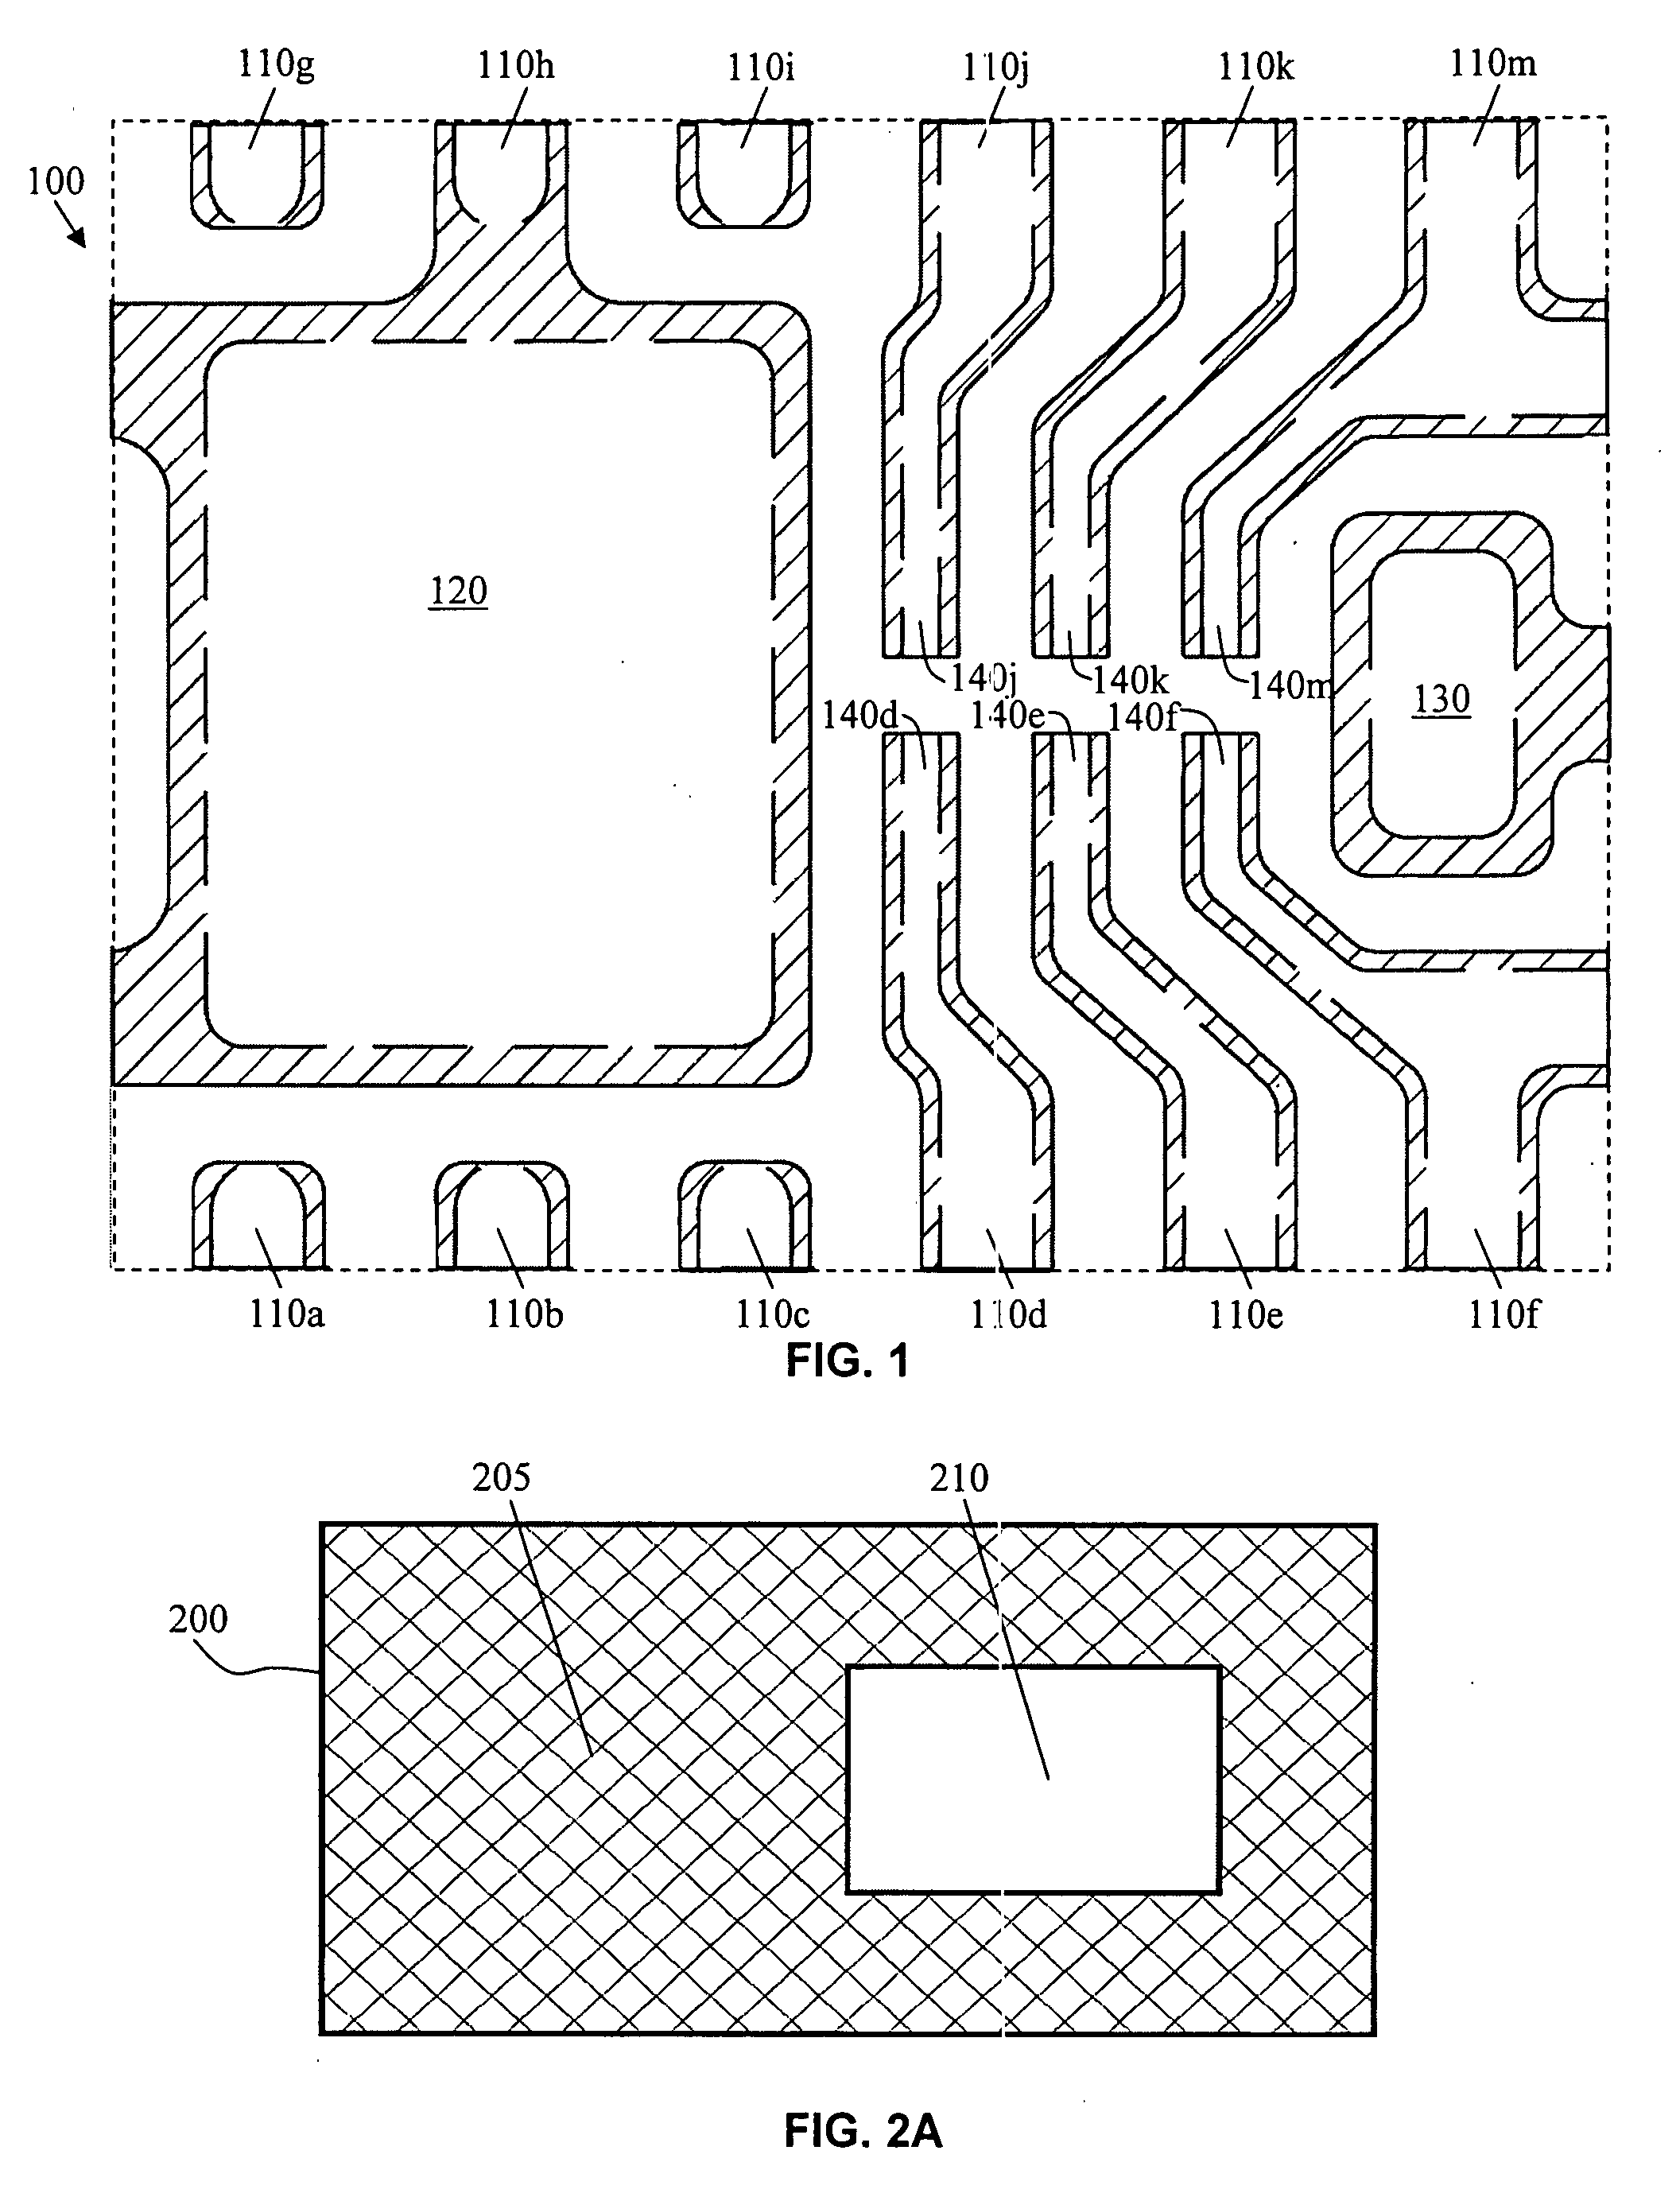 Semiconductor power device package having a lead frame-based integrated inductor